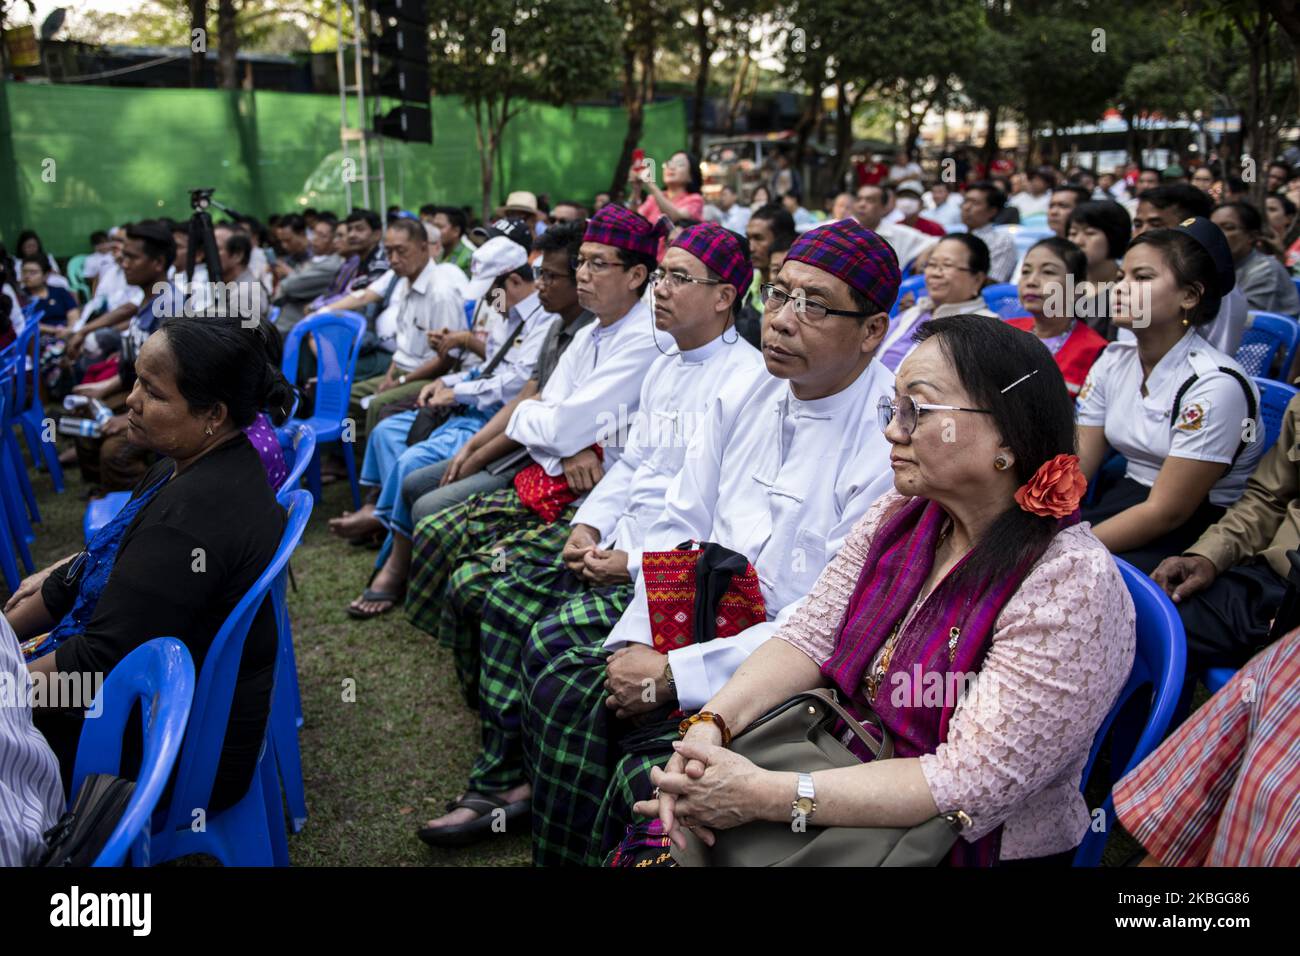 People attend a public meeting in Yangon on February 8, 2020. (Photo by Shwe Paw Mya Tin/NurPhoto) Stock Photo